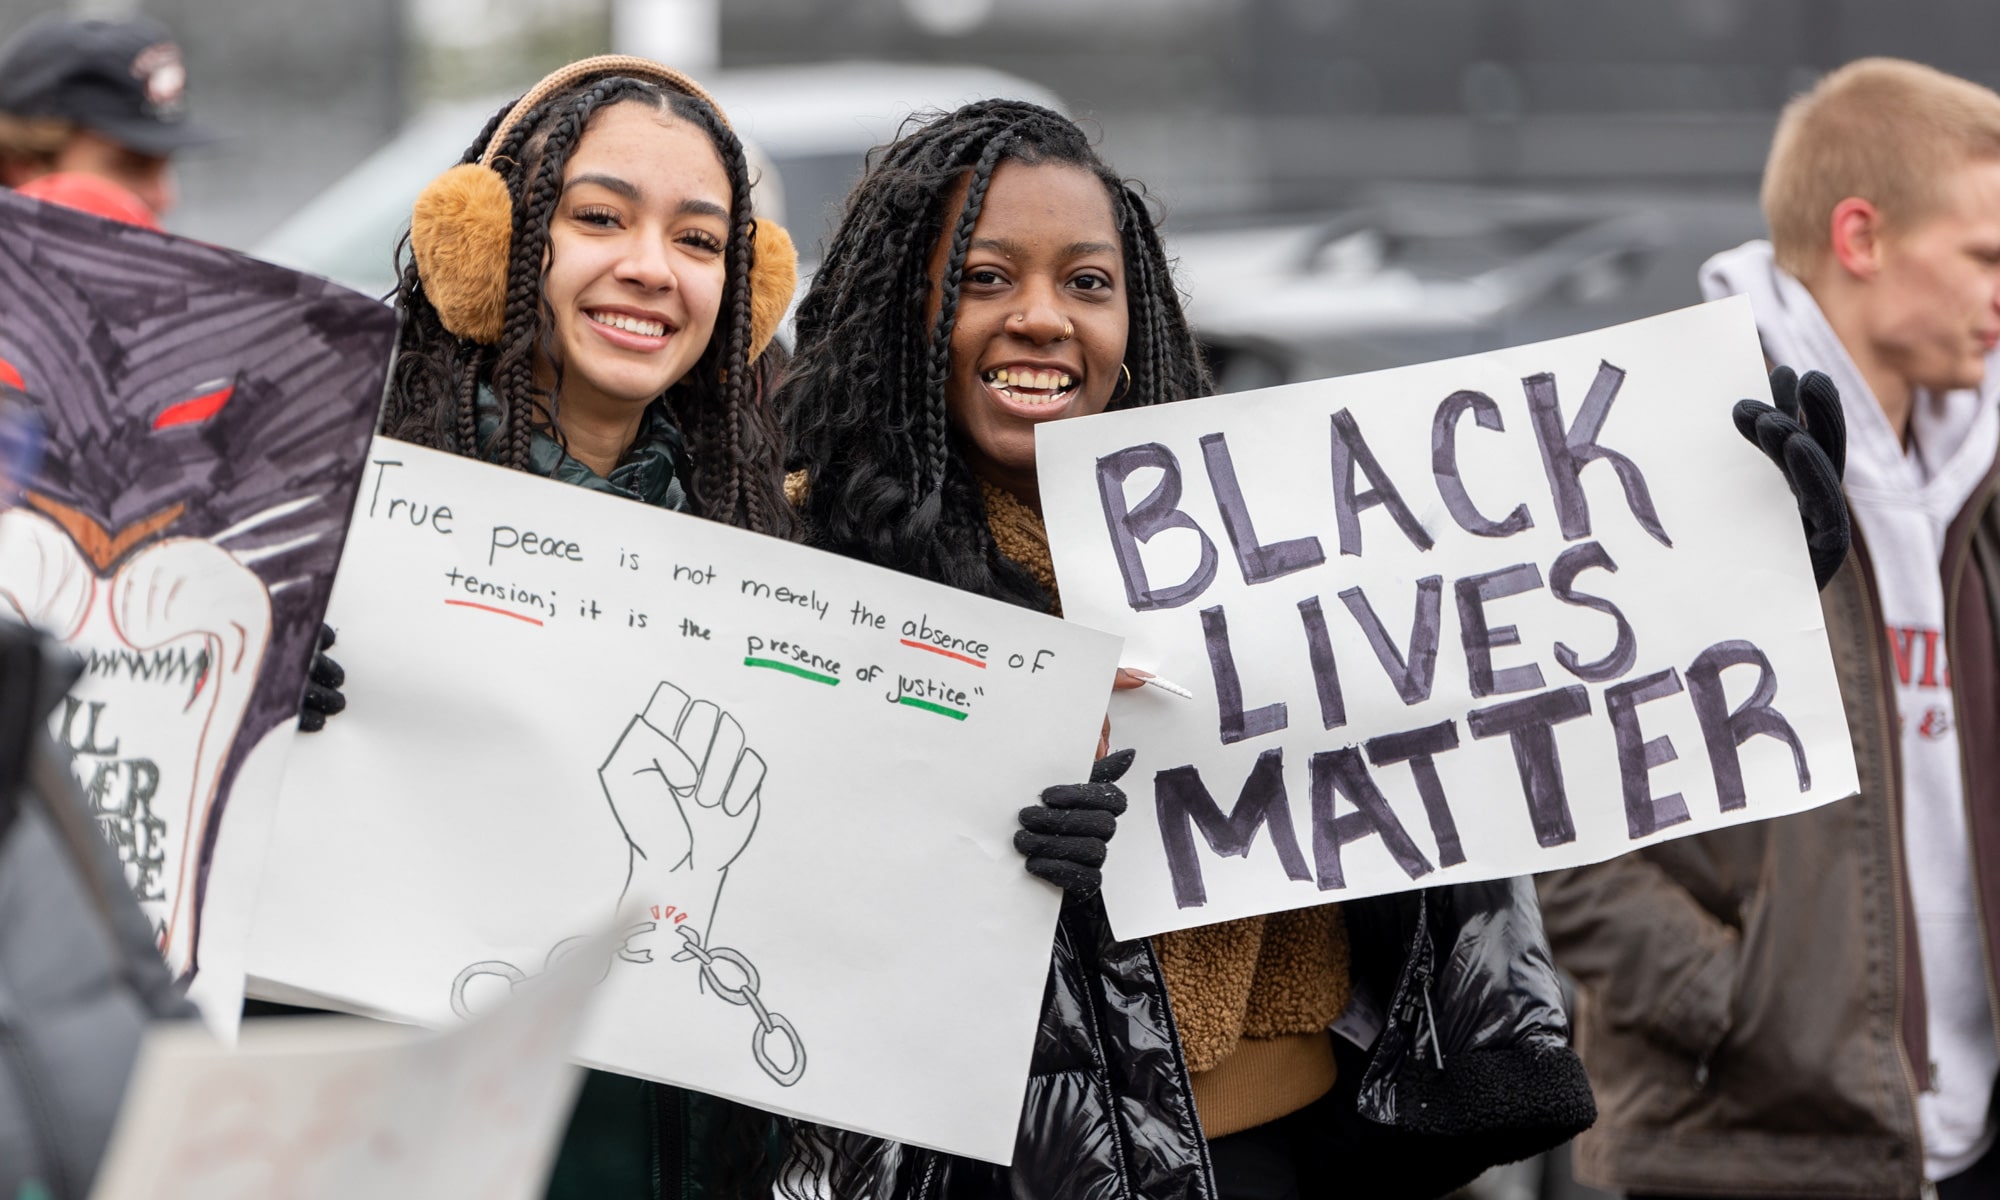 Niomi Ellis ’26 and Chanel Jordan ’26 were among hundreds of students to join the Martin Luther King Jr. activities on campus.